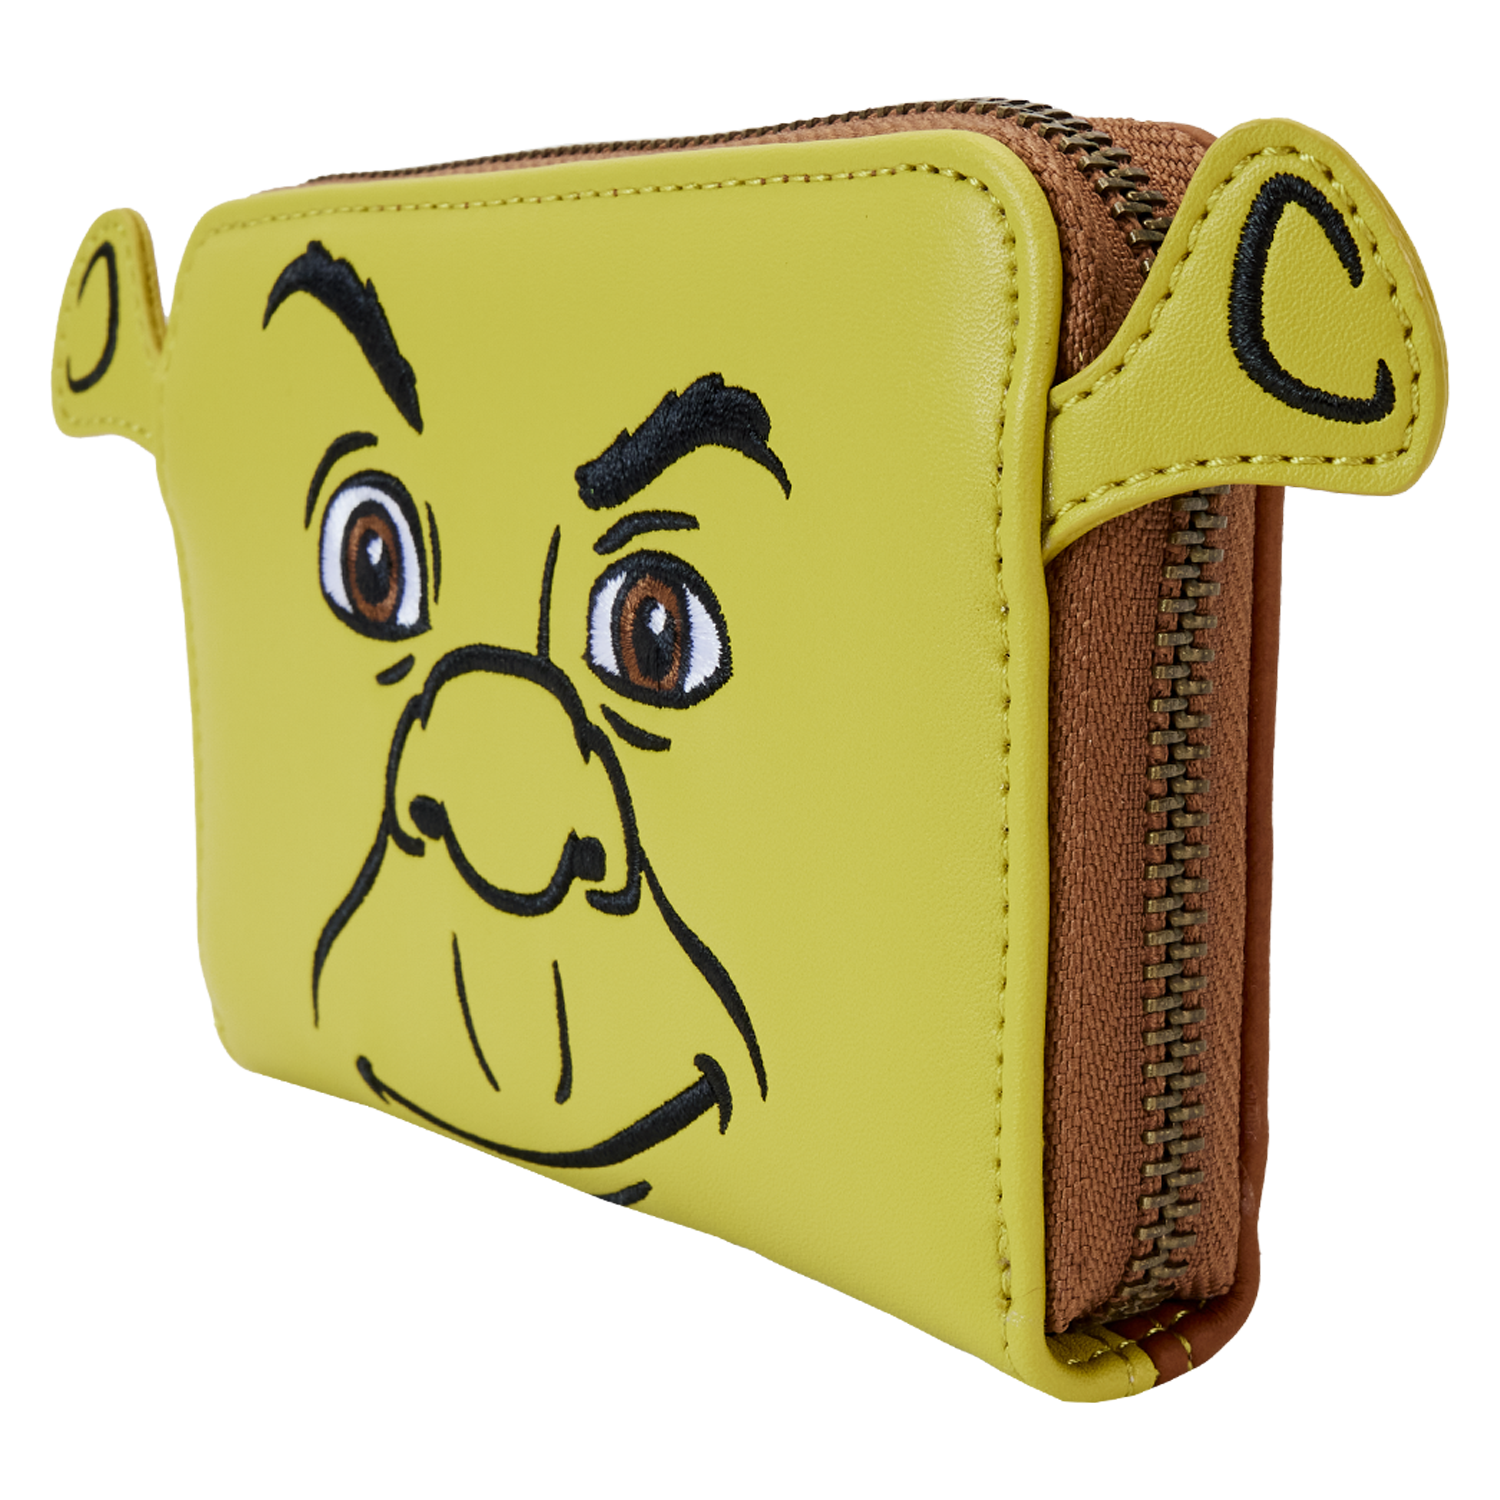 Loungefly  DREAMWORKS SHREK KEEP OUT COSPLAY ZIP AROUND WALLET